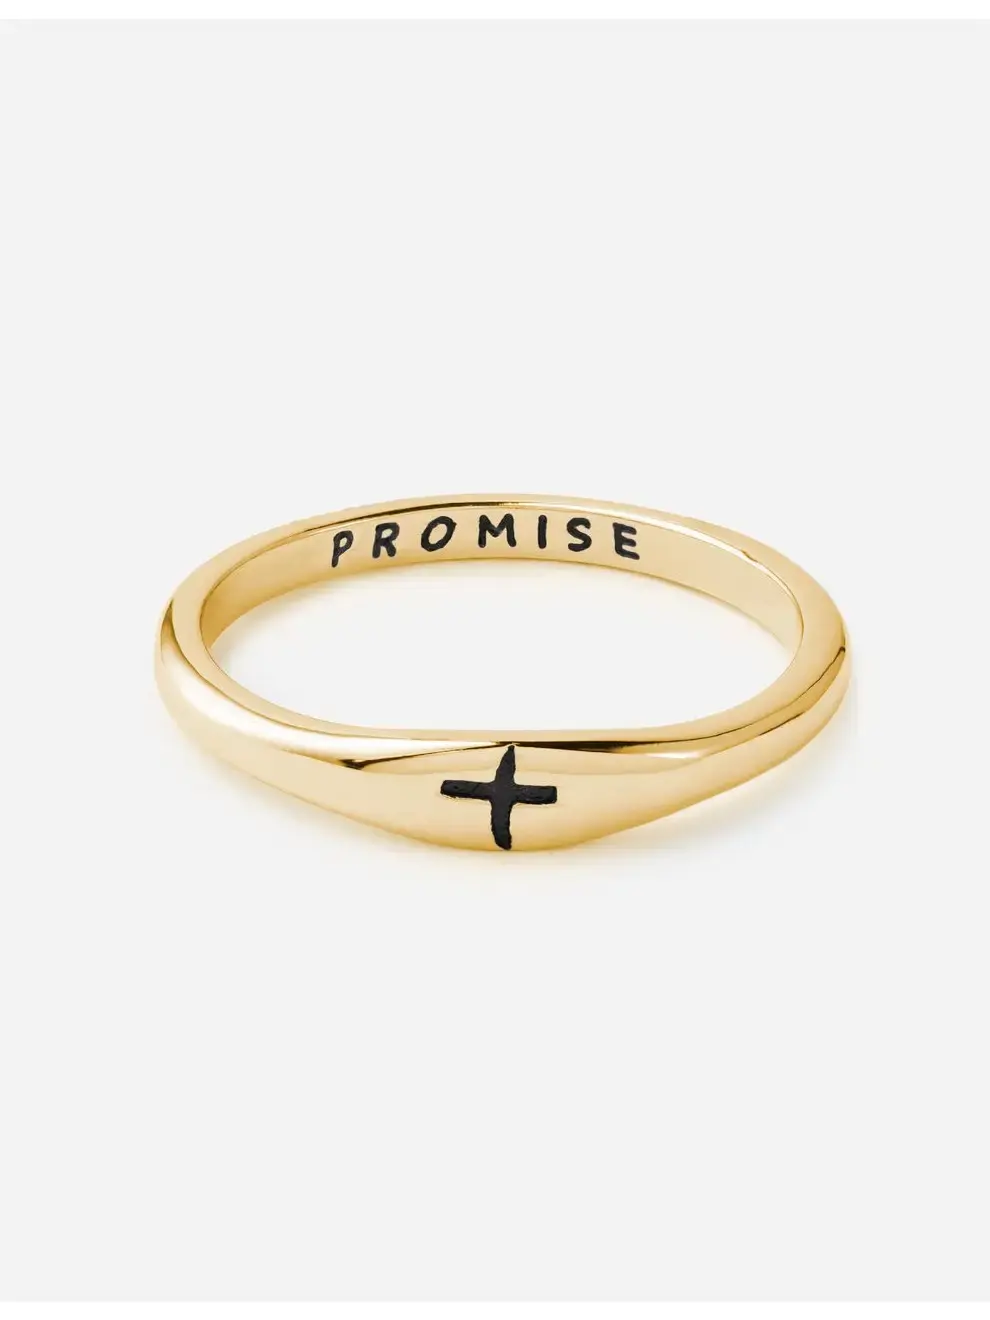 Gold Promise Ring - Size 5